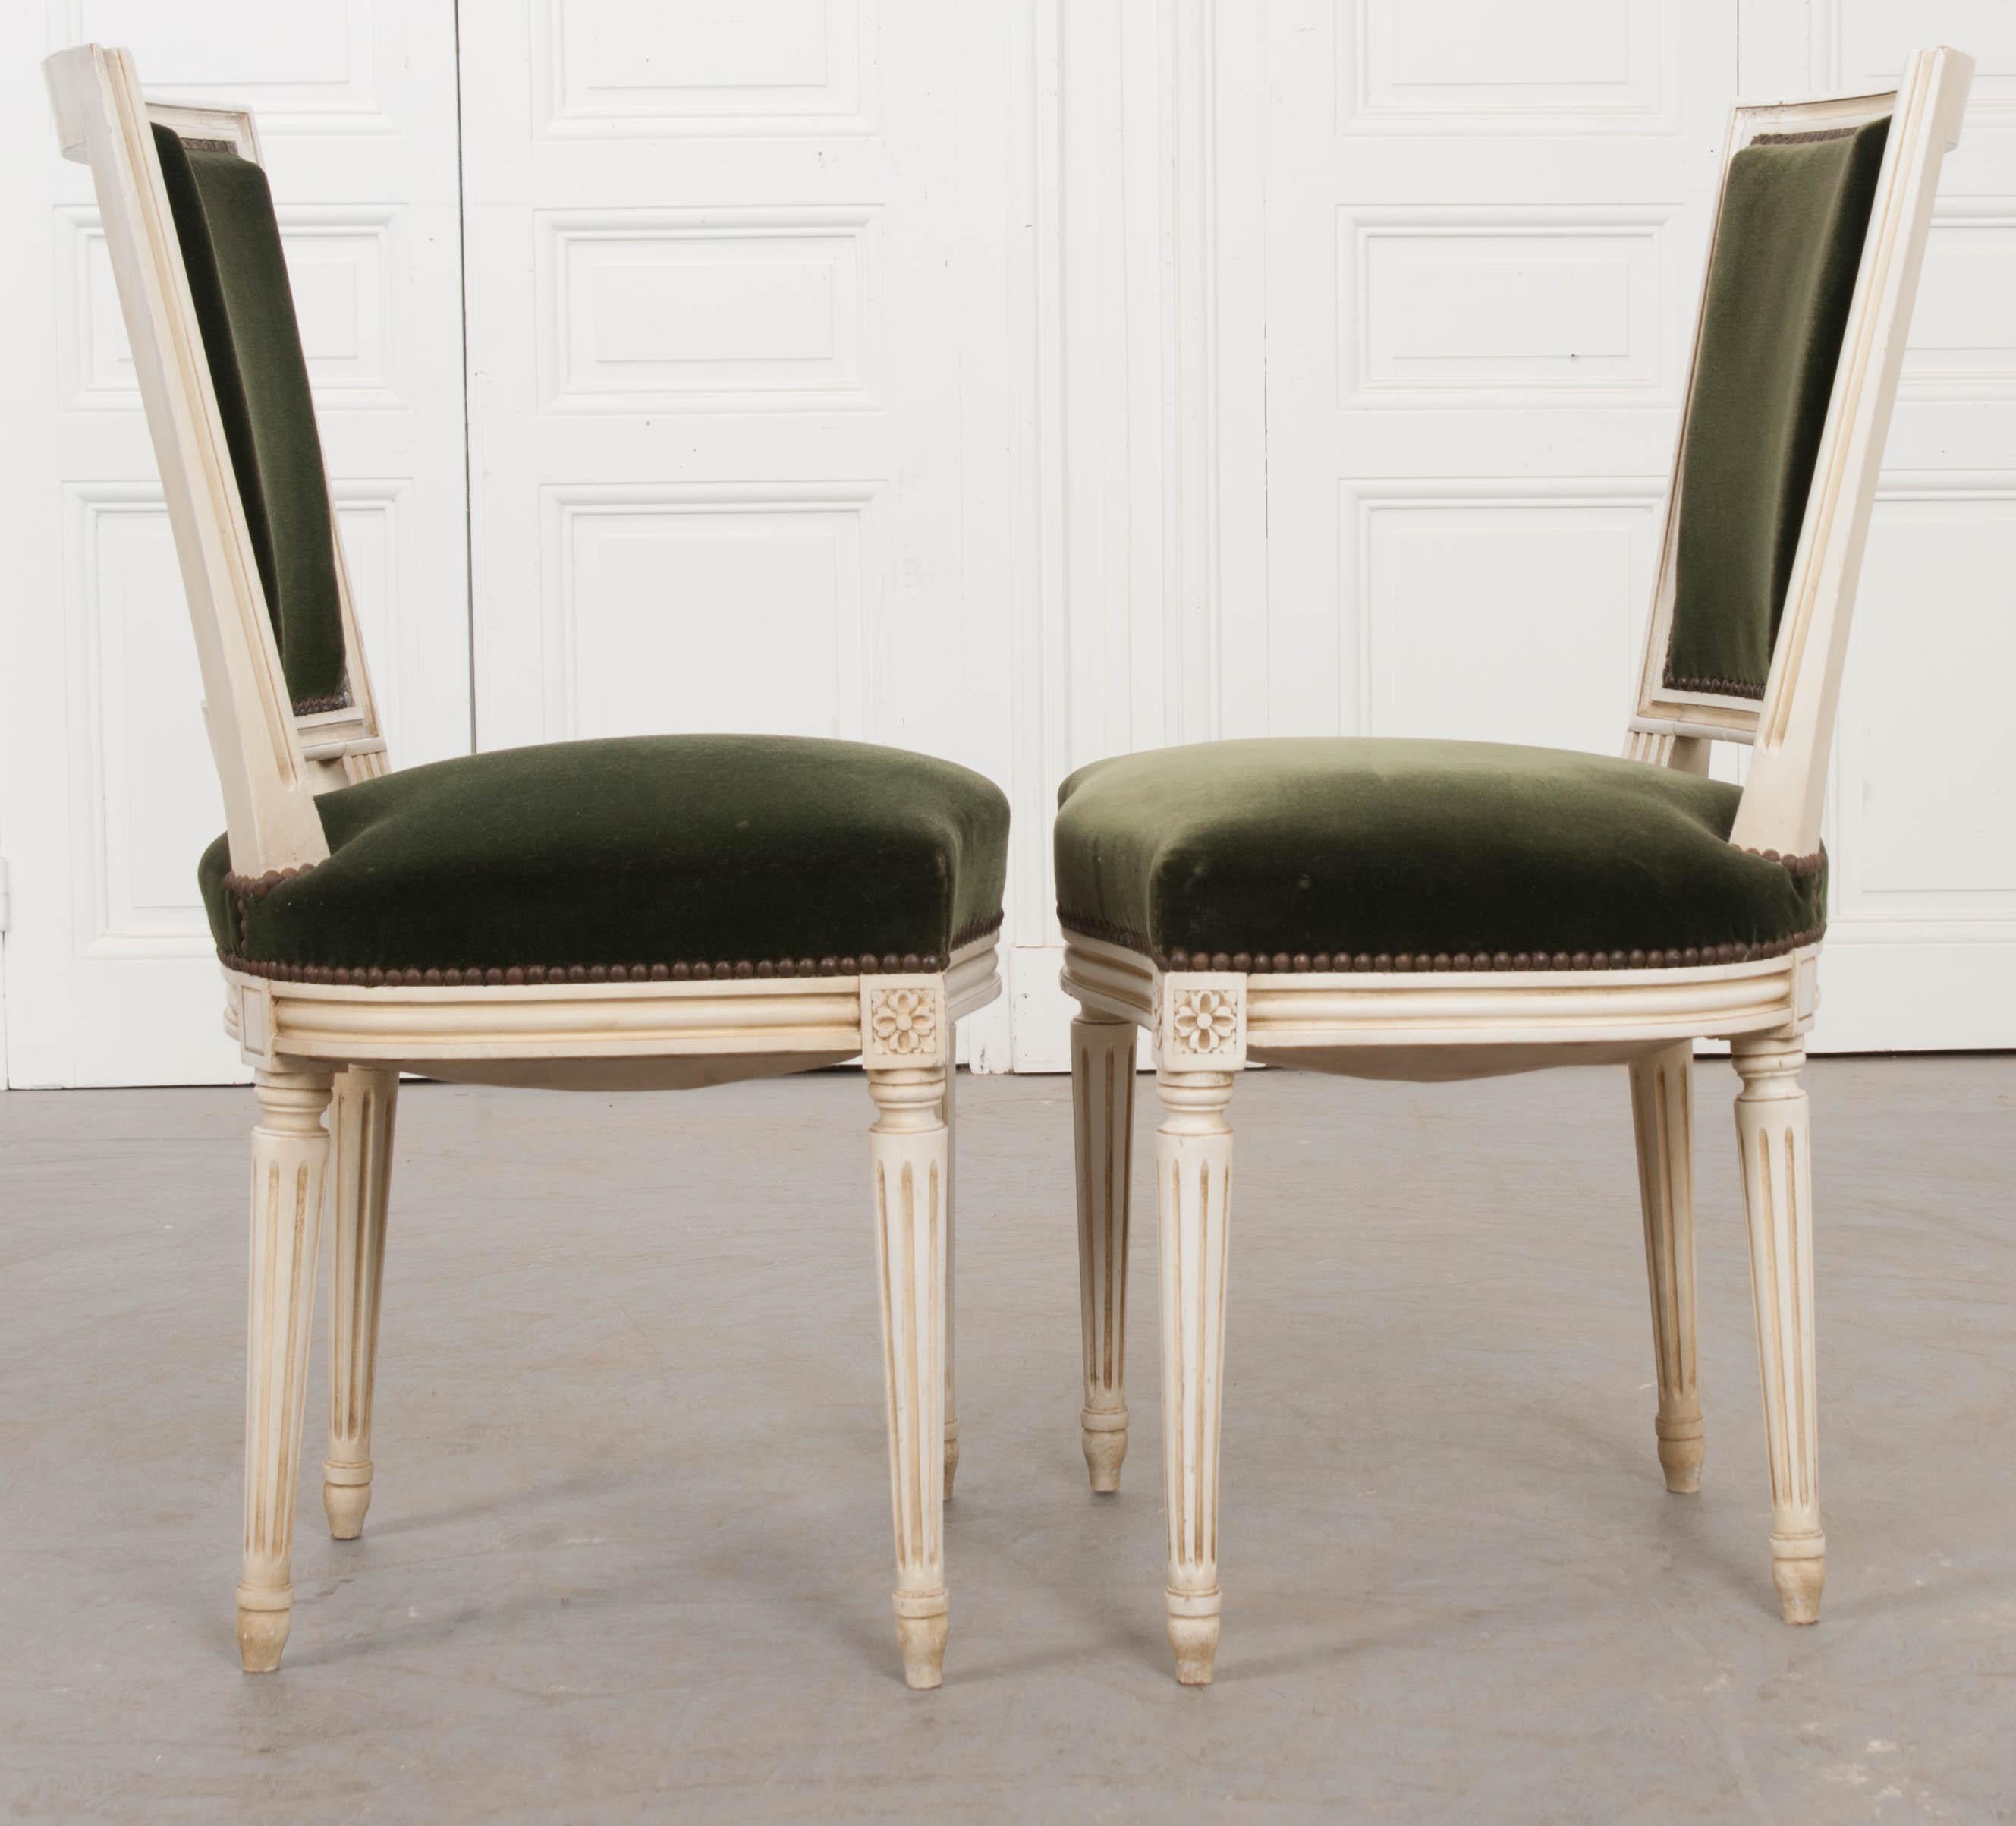 This charming pair of vintage Louis XVI cream-painted side chairs, circa 1970s, were found in France and are presented in their original green velvet upholstery.